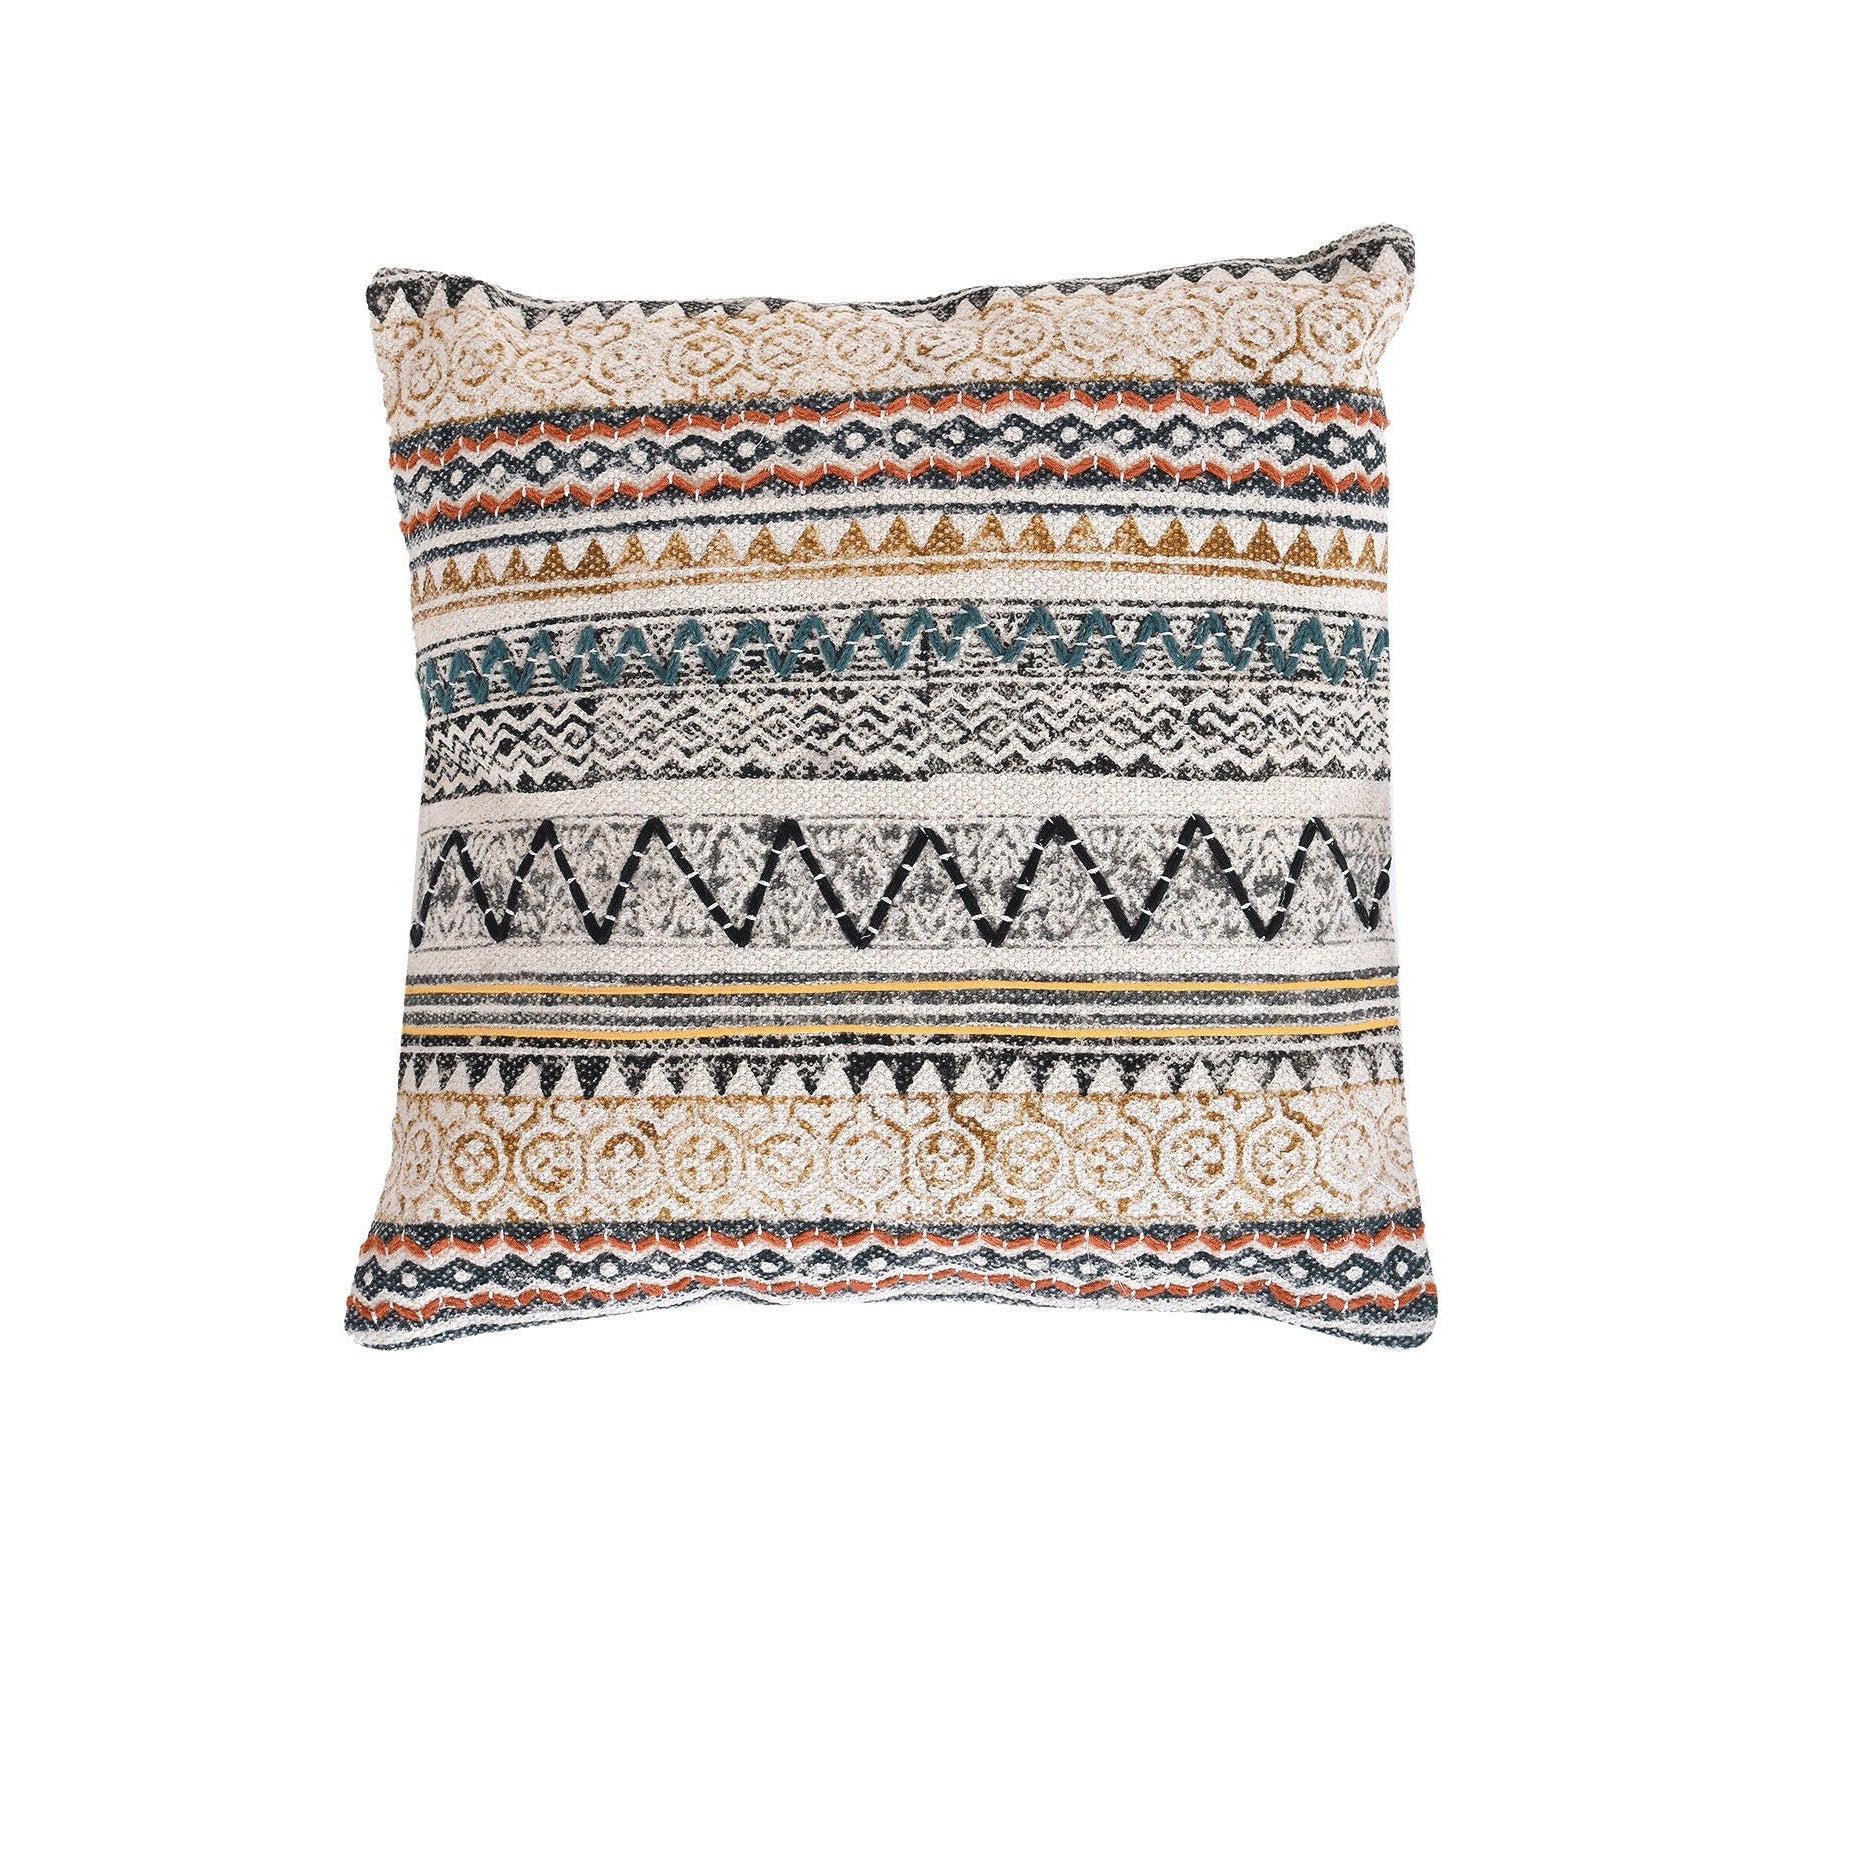 'Moroccan Chic' 100% Cotton Berber Style Cushion Cover